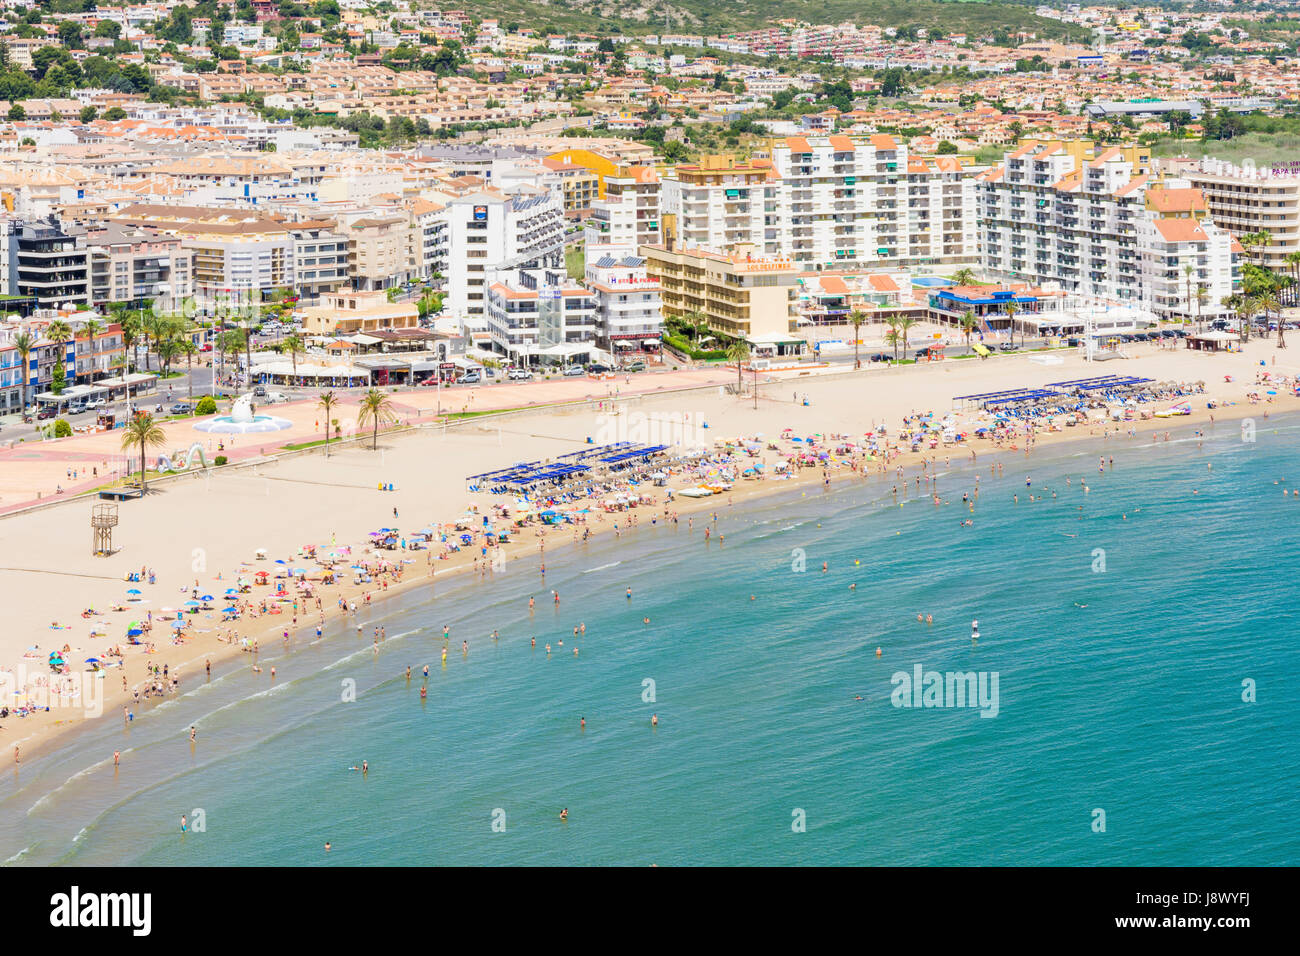 Playa Norte and beach side hotels along the waterfront of Peniscola, Spain Stock Photo